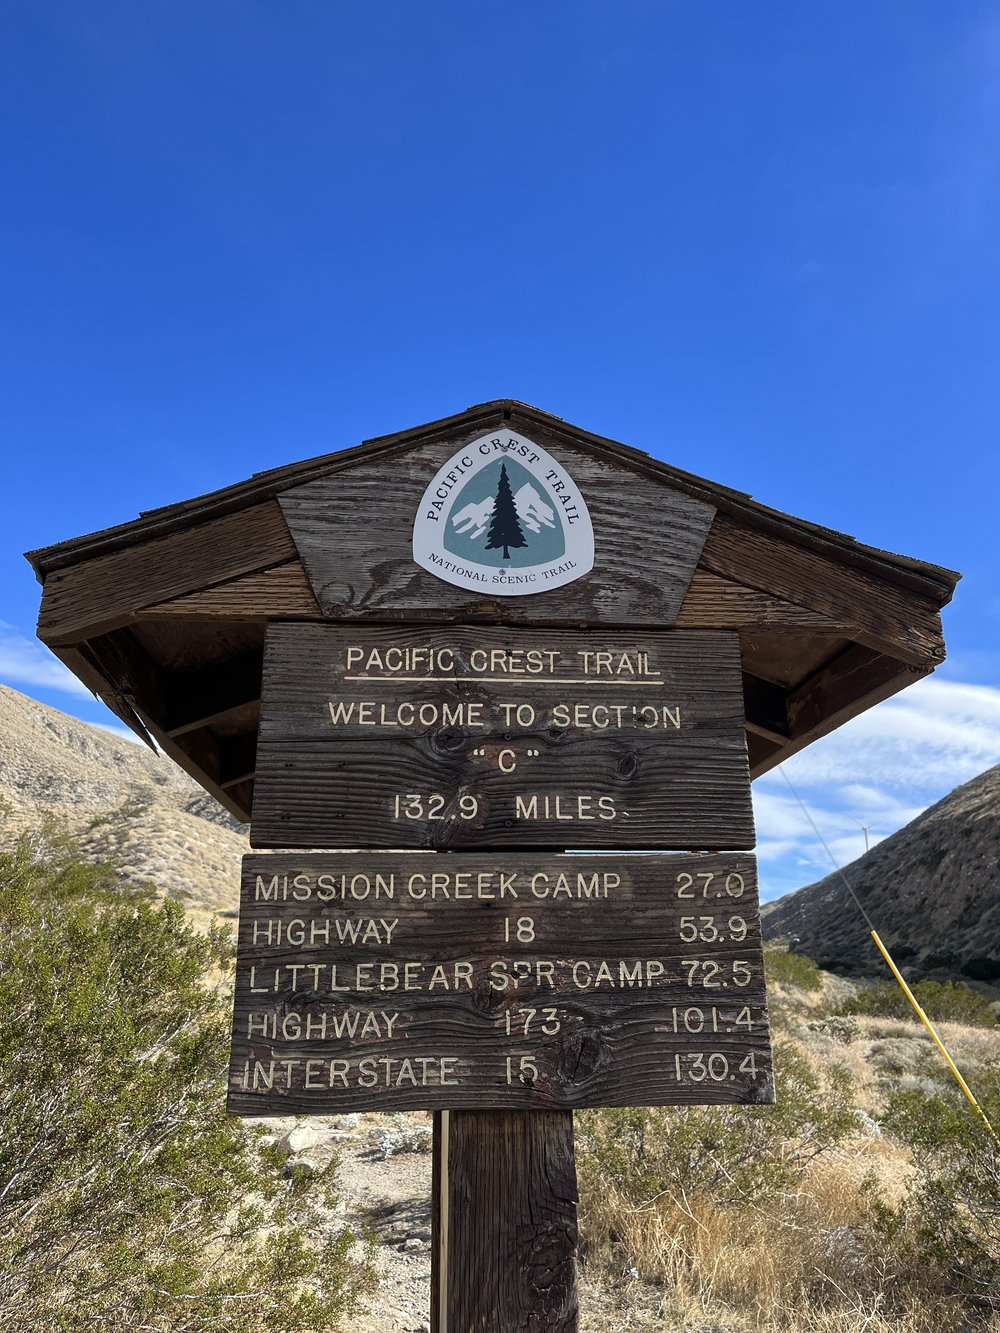 PCT Section C Welcome Sign.jpg